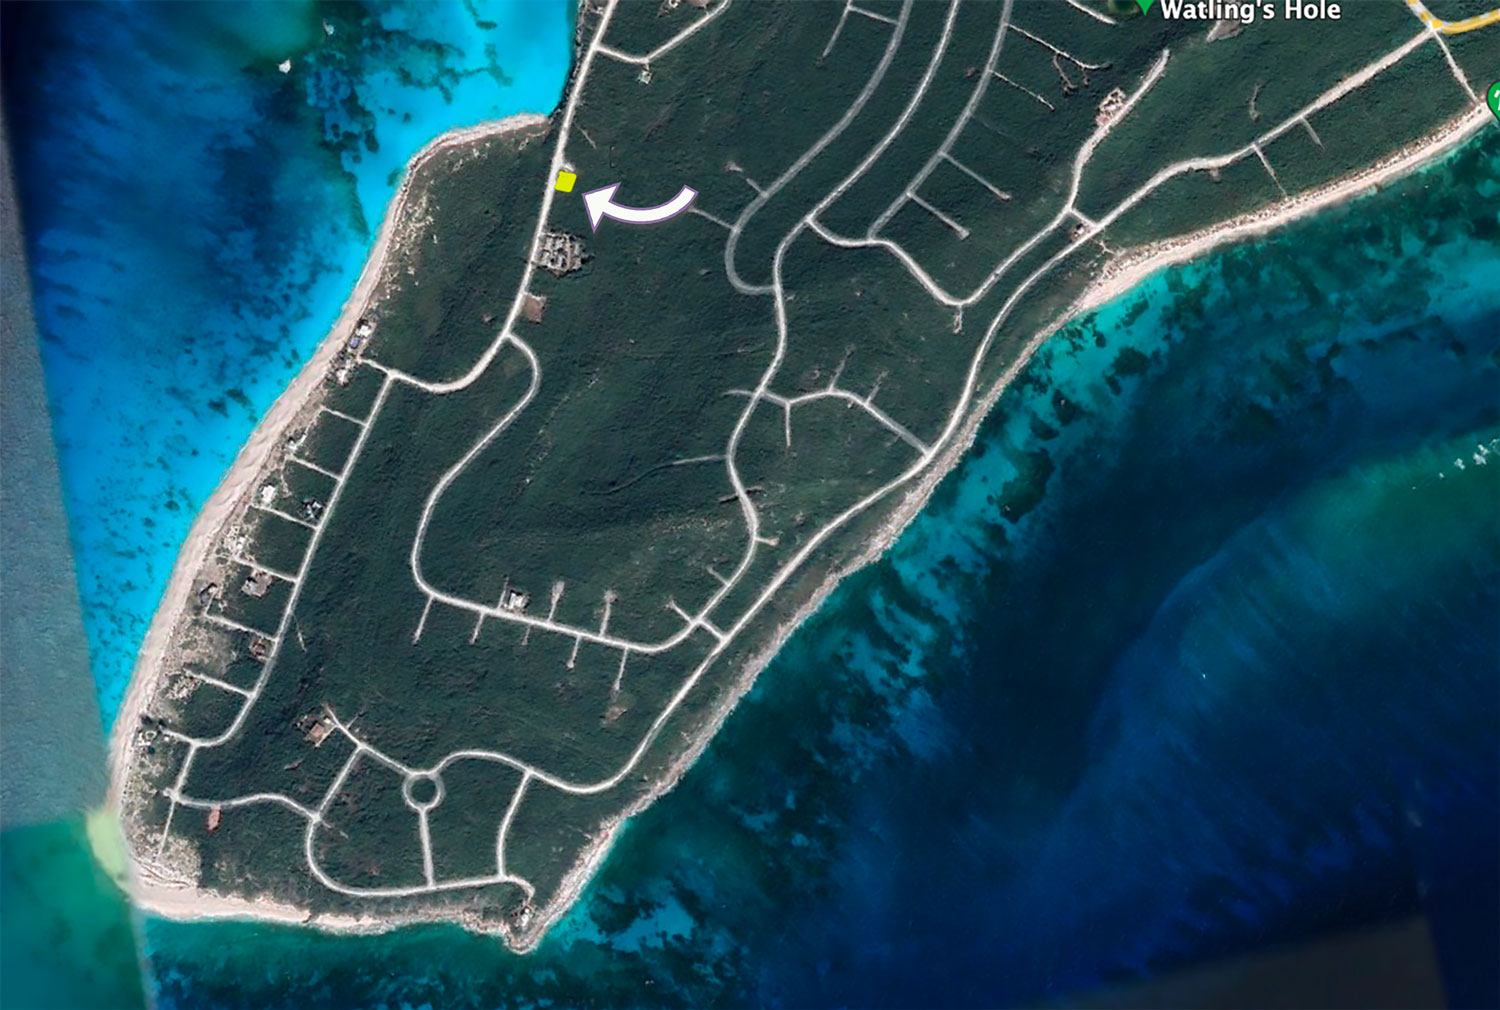 Hilltop lot with stunning ocean views in Sandy Point, San Salvador, The Bahamas